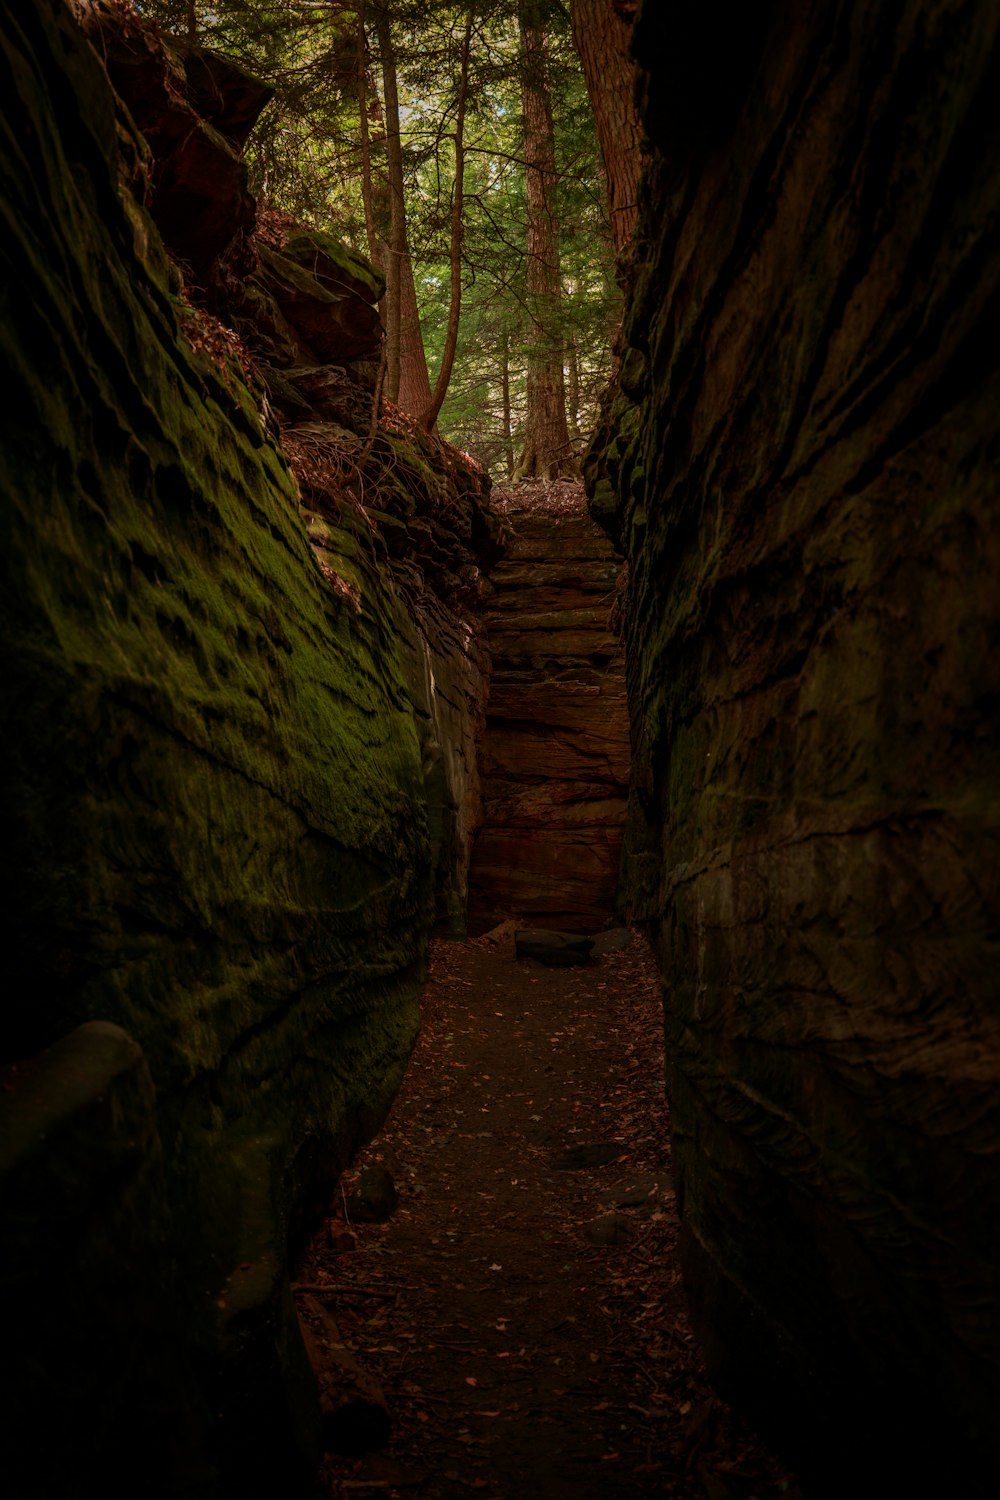 brown wooden stairs between brown rock formation during daytime